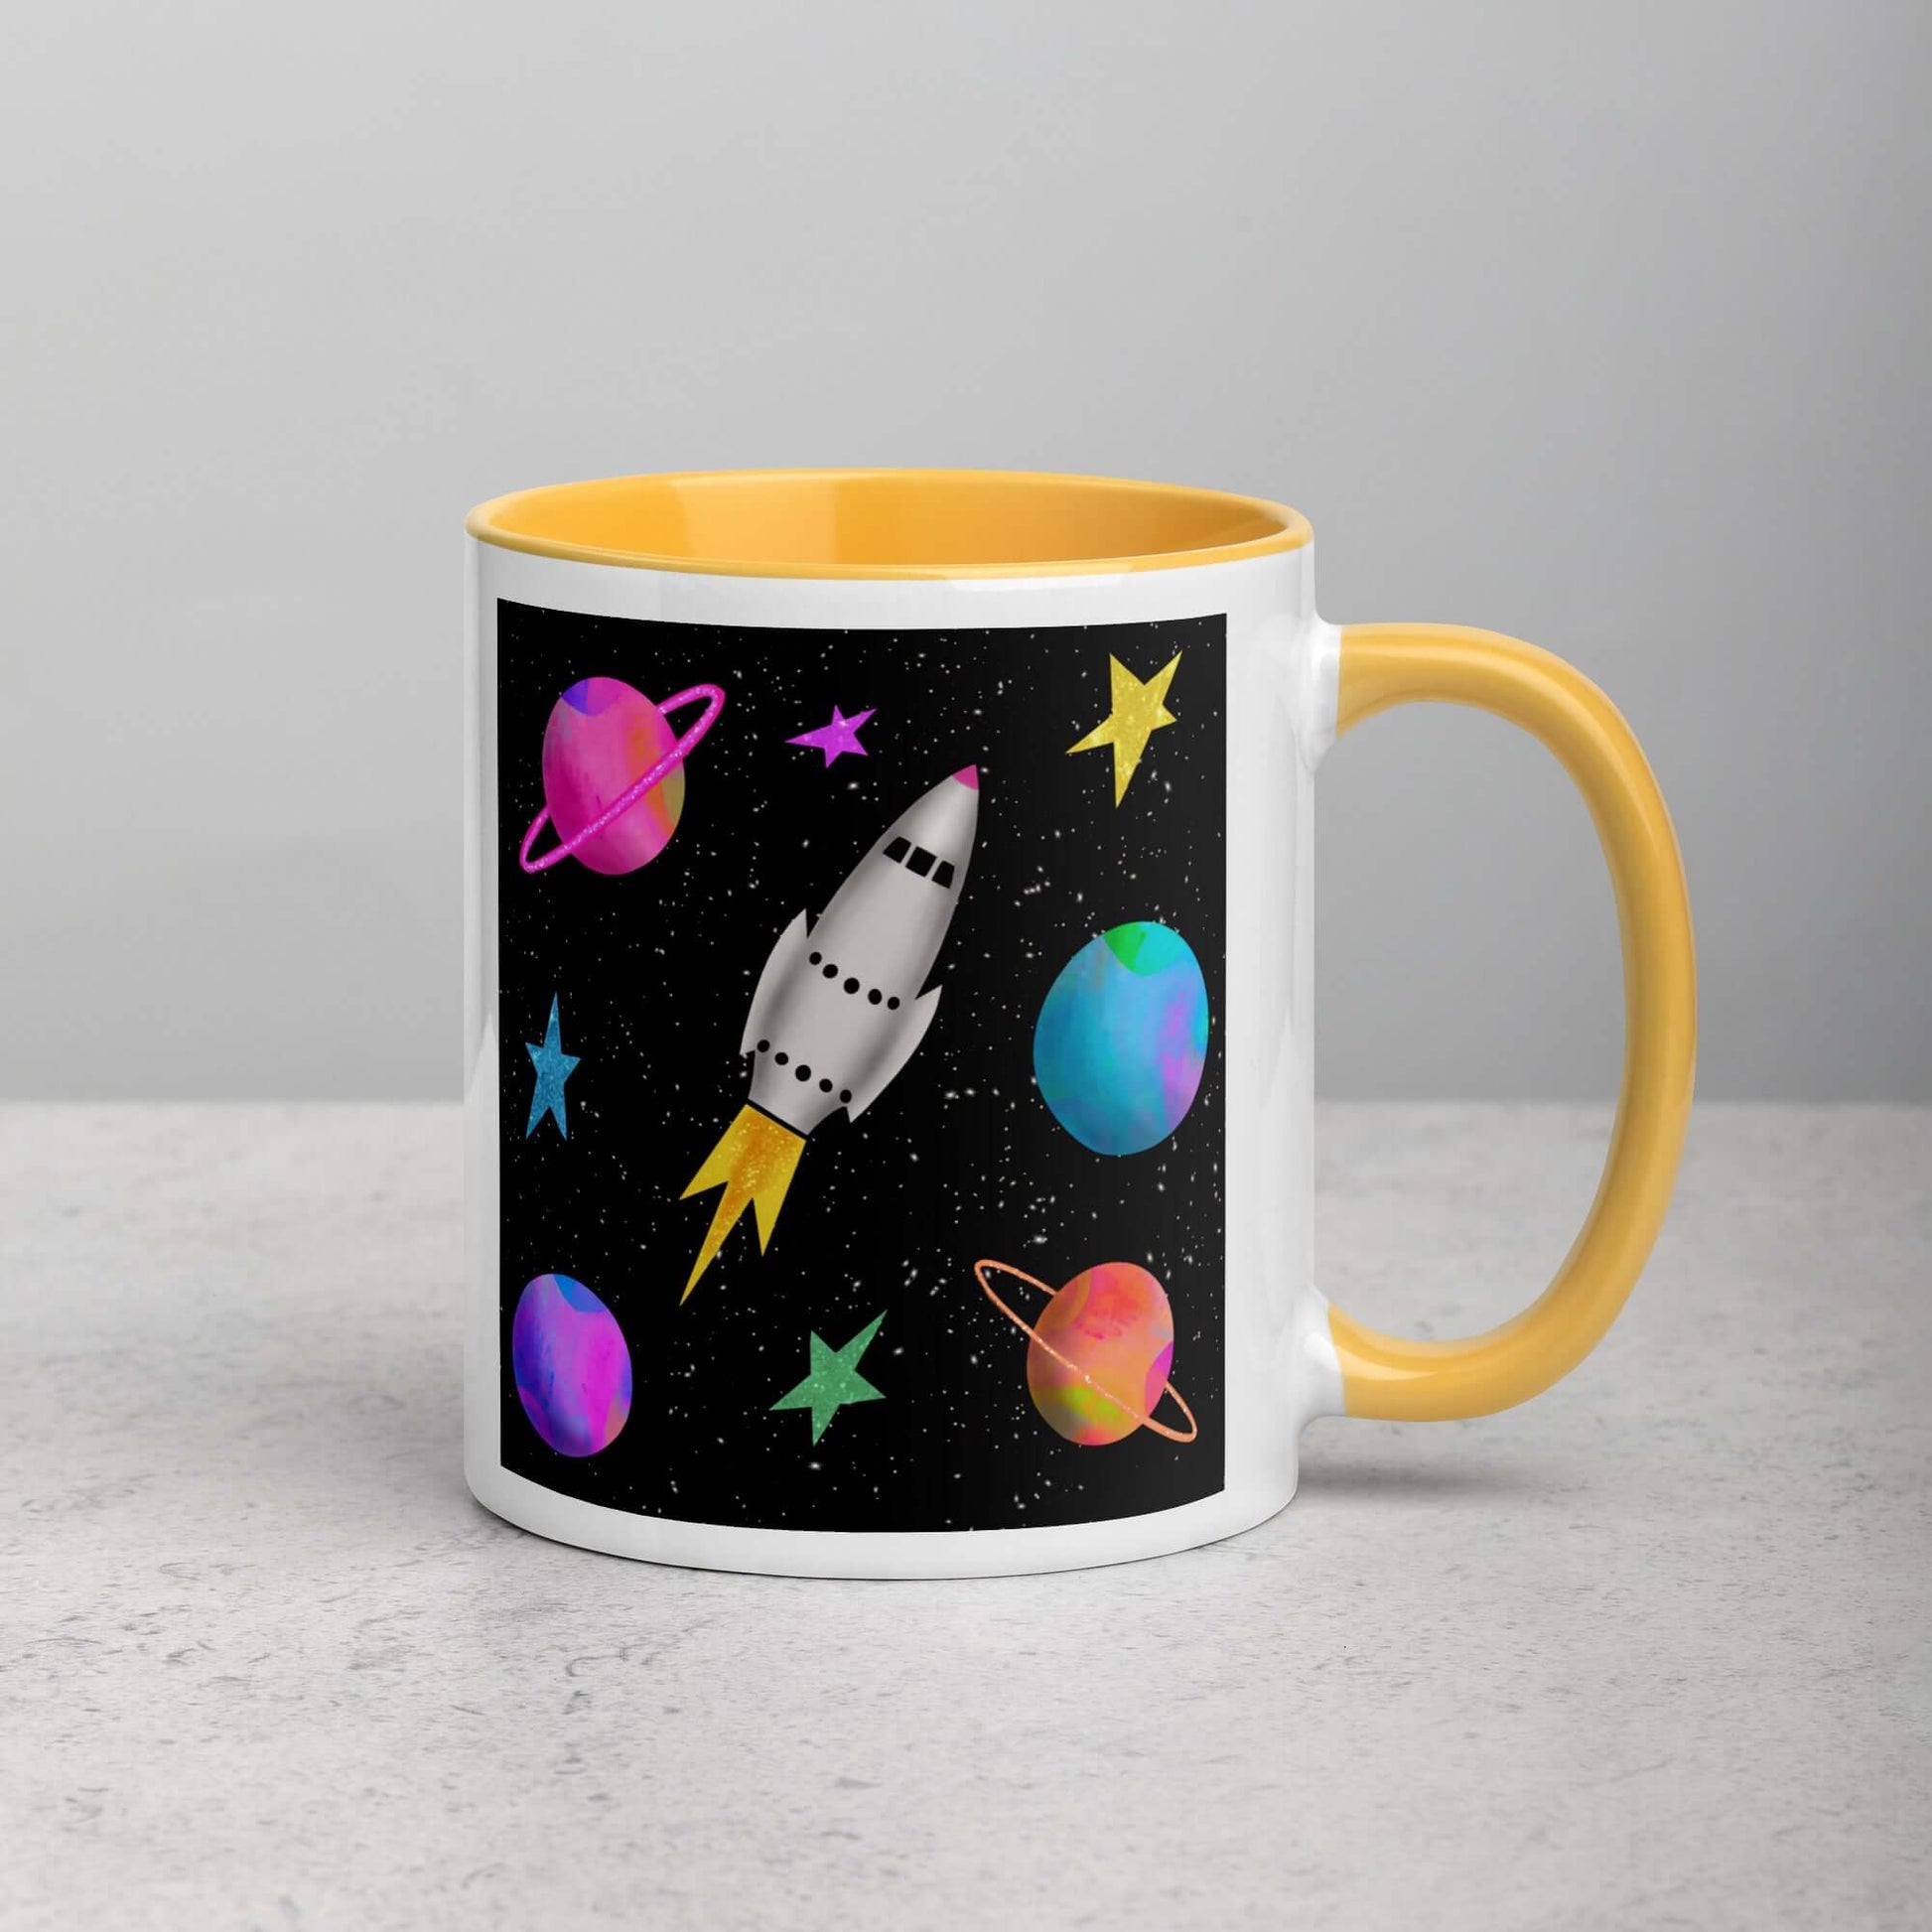 Whimsical Space Rocket with Colorful Planets and Stars on Black Background “Space Rockets” Mug with Golden Yellow Color Inside Right Handed Front View